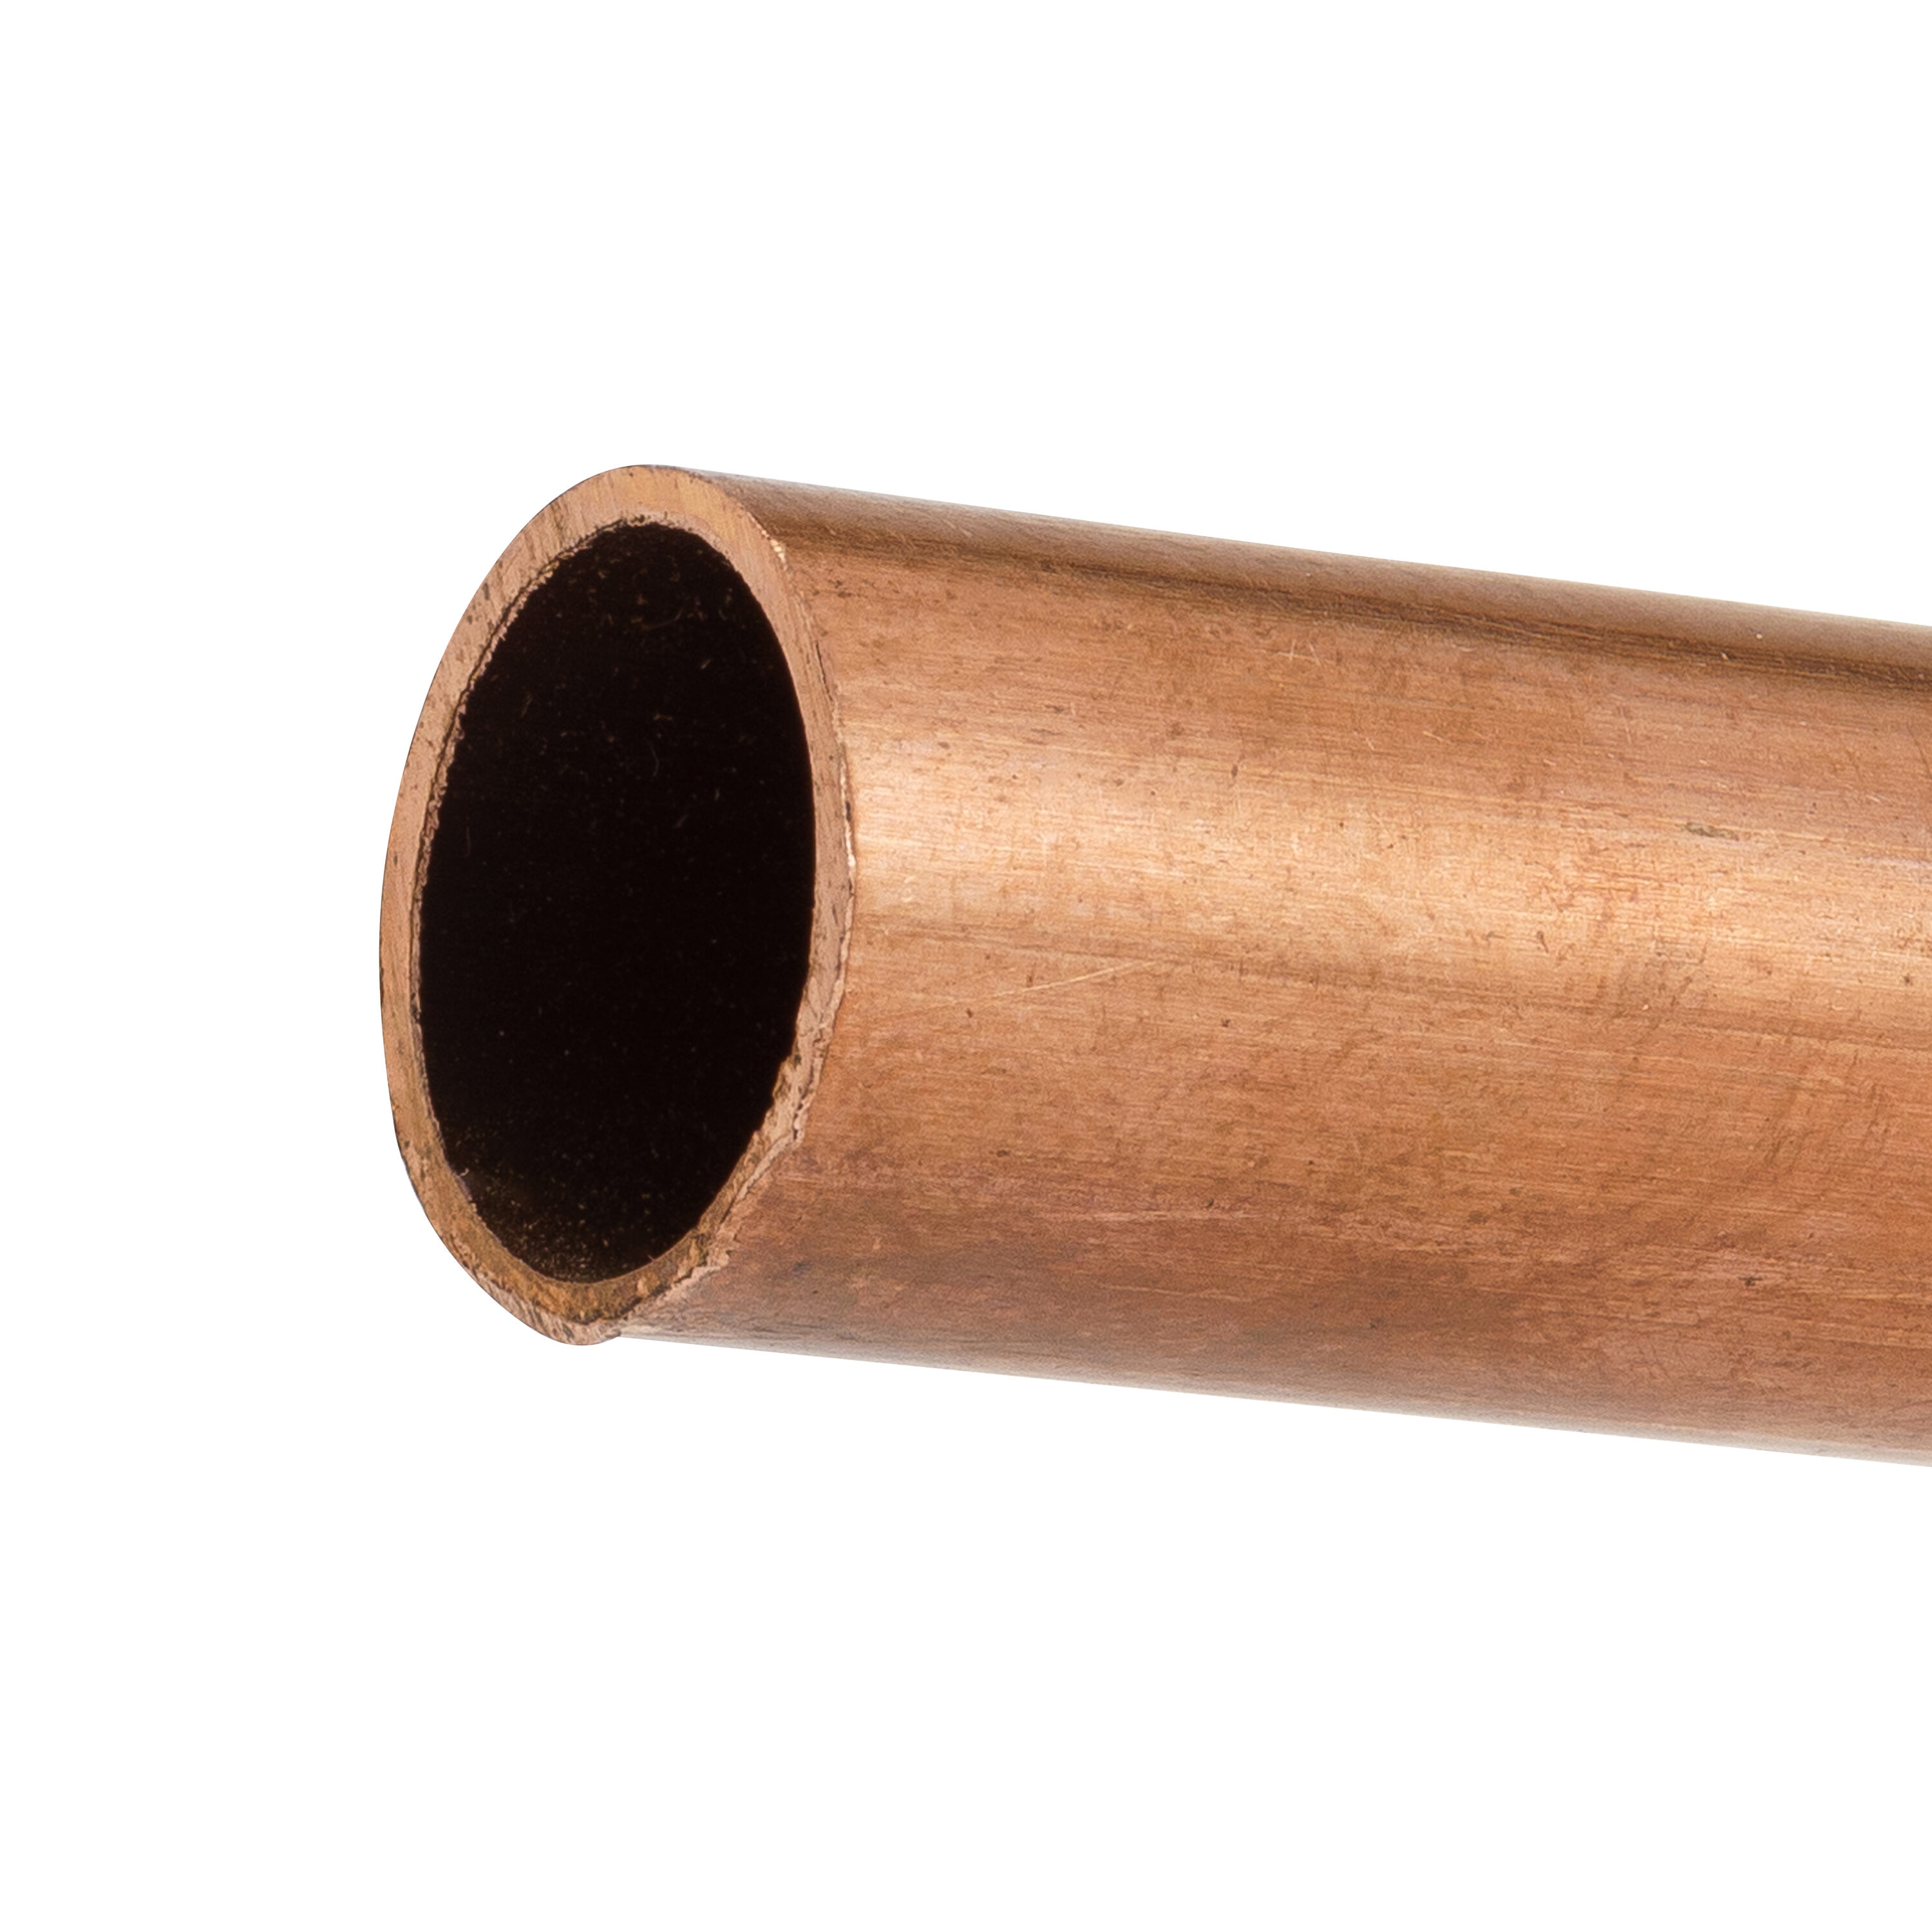 Copper Pipe & Fittings at